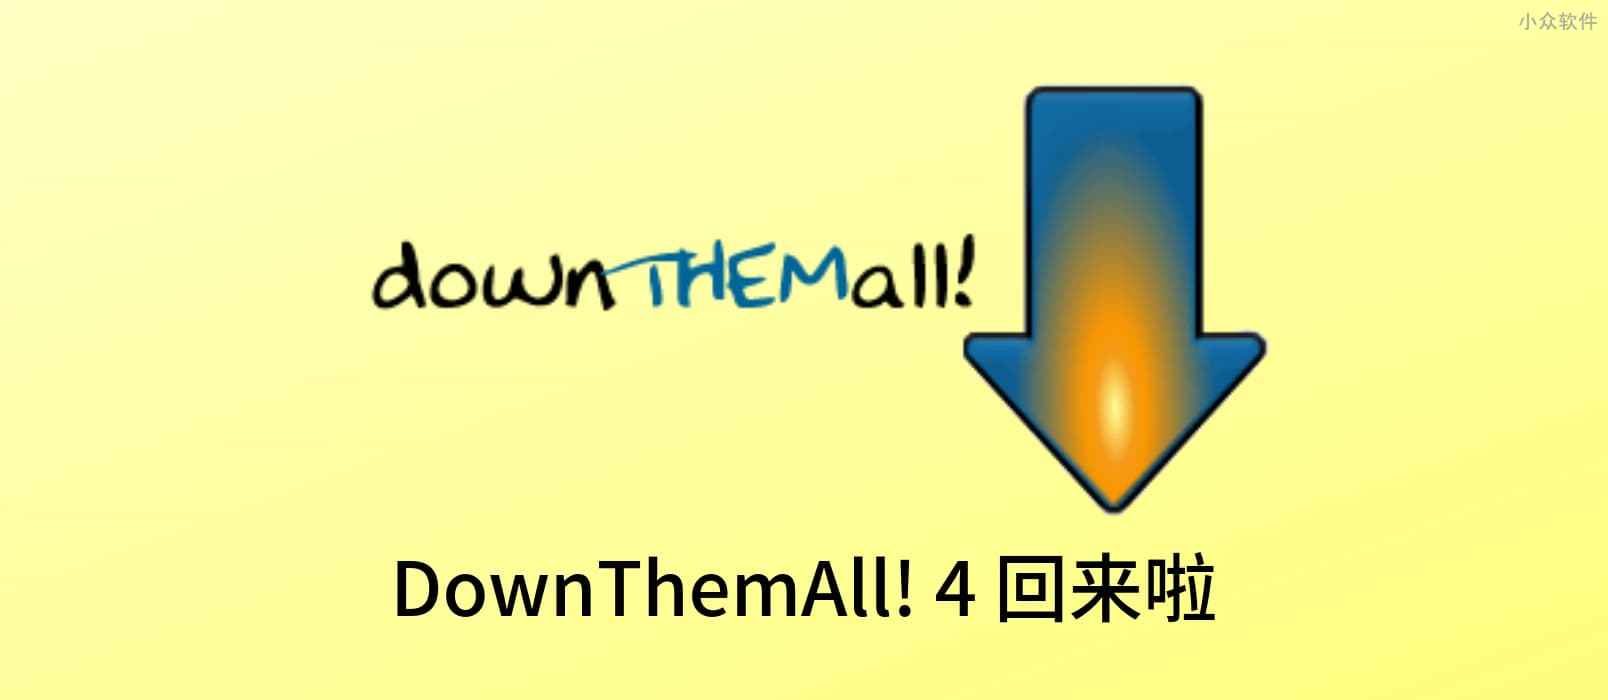 DownThemAll! 4 回来了